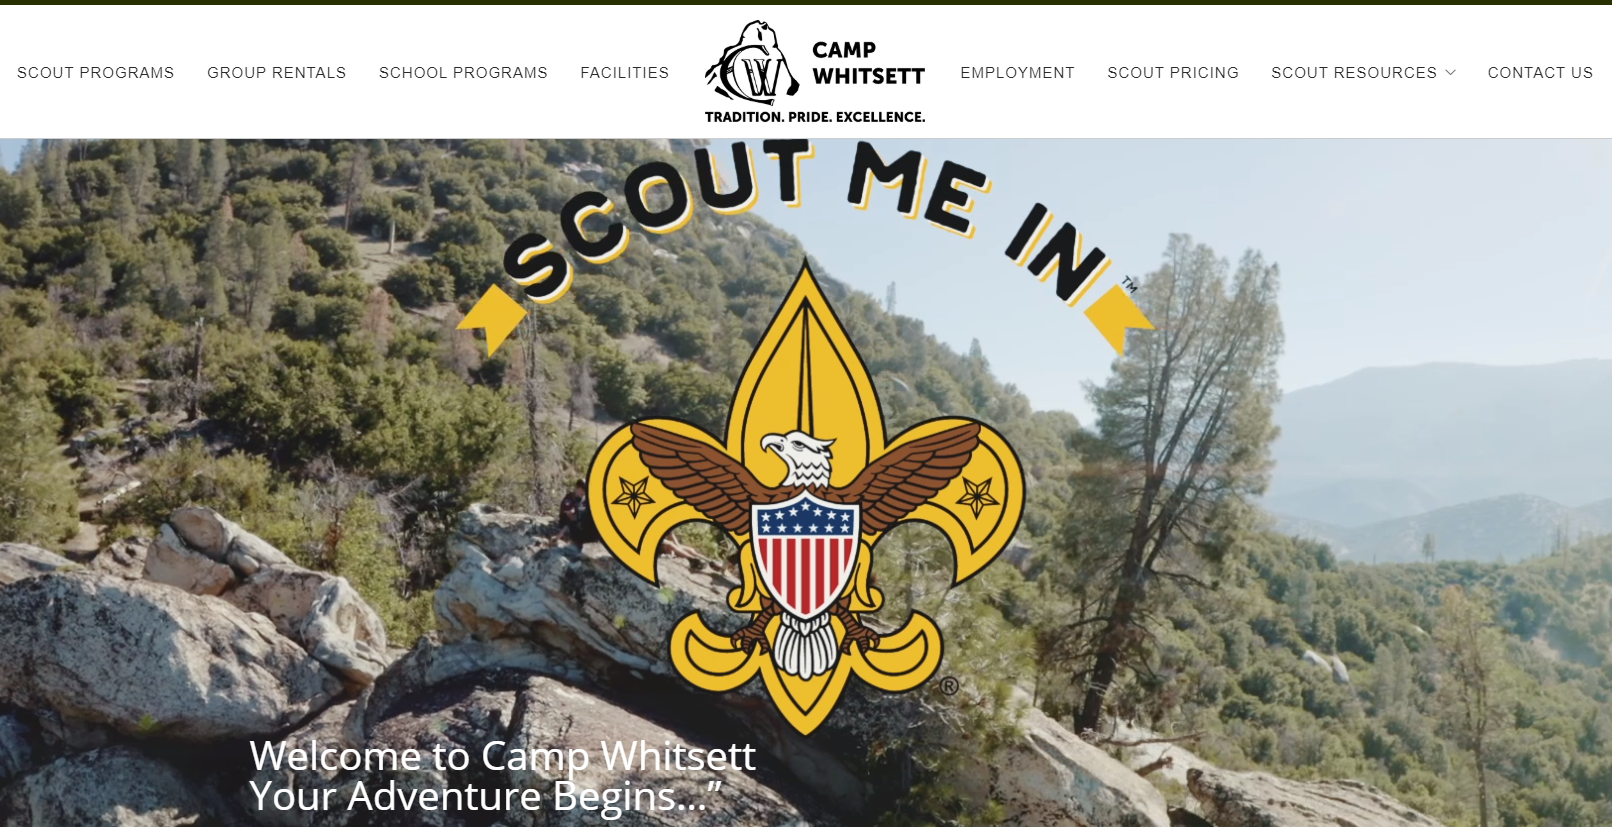 GoMarketing Inc. Launches Three New Camping Websites for the Western Los Angeles County Council of the Boy Scouts of America